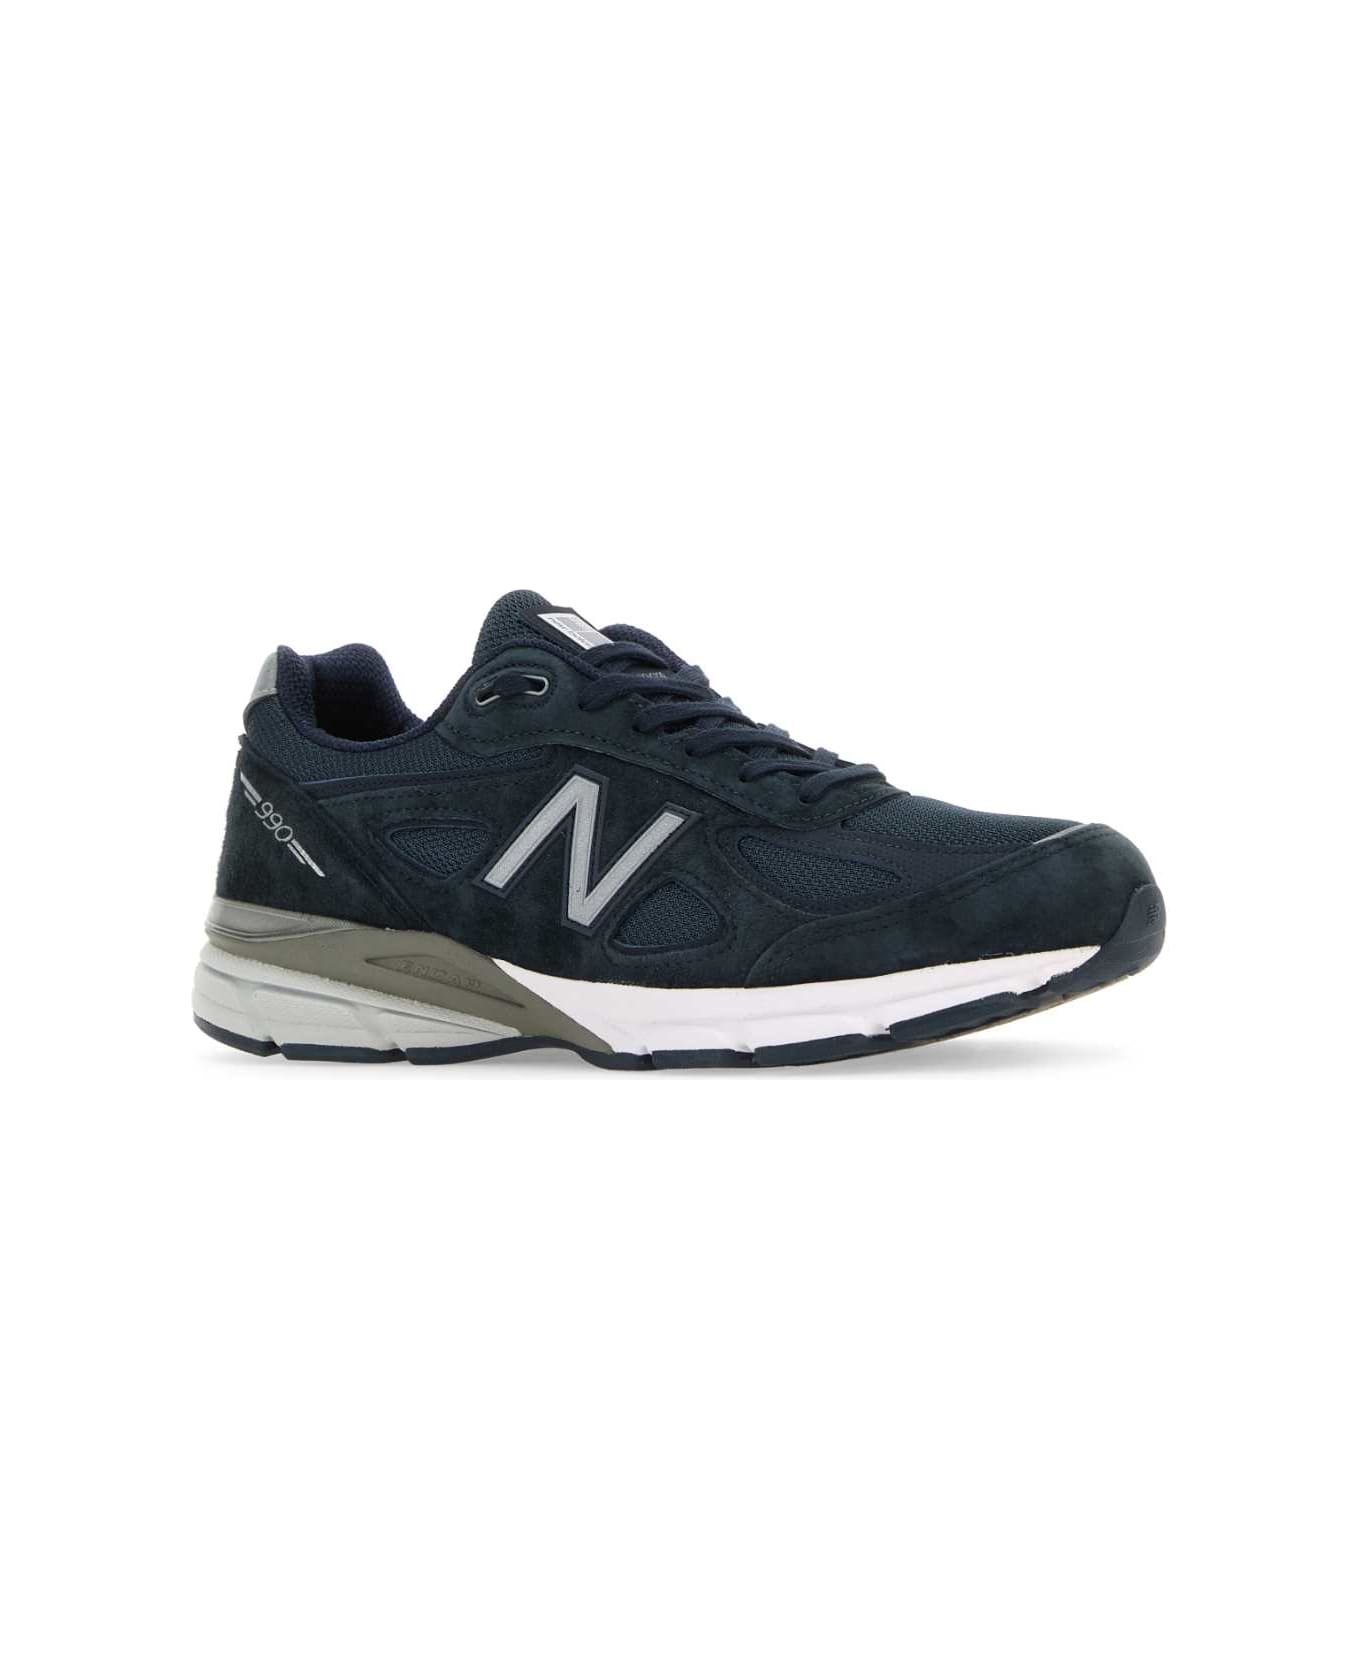 New Balance Blue Fabric And Suede 990v4 Sneakers - NAVY スニーカー